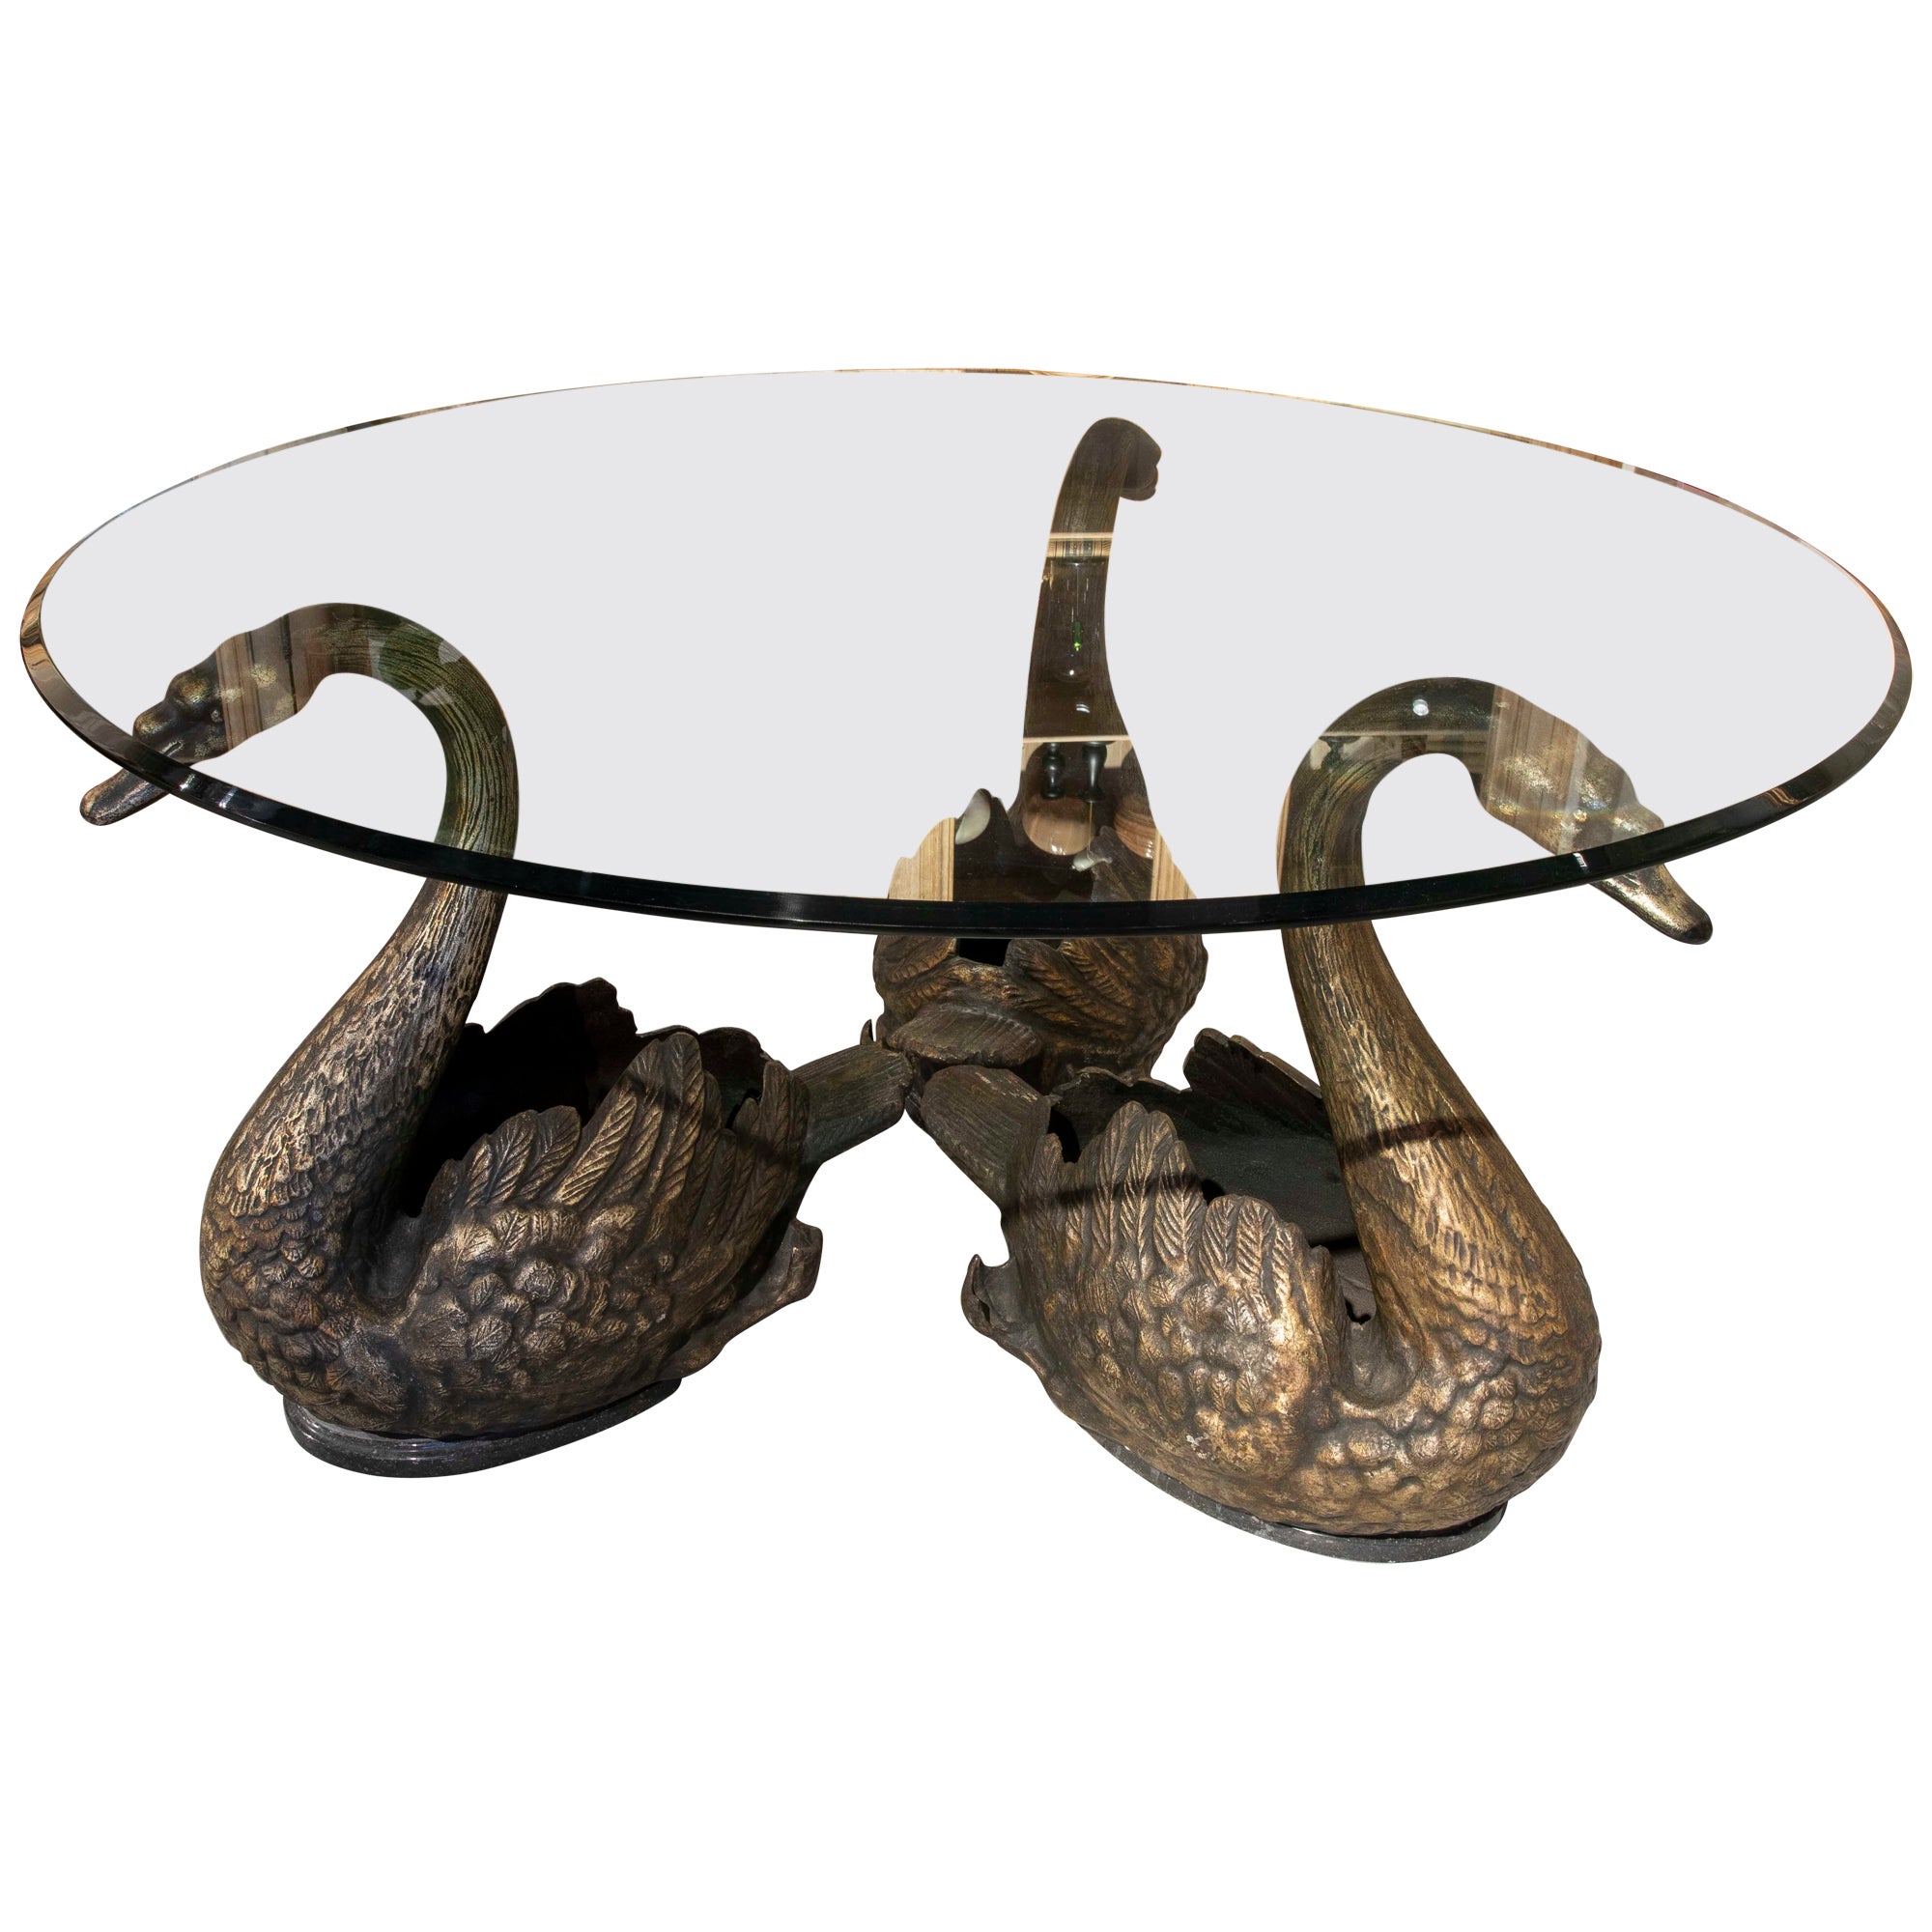 Coffee Table Composed of Three Patinated Iron Swans with Antique Finish